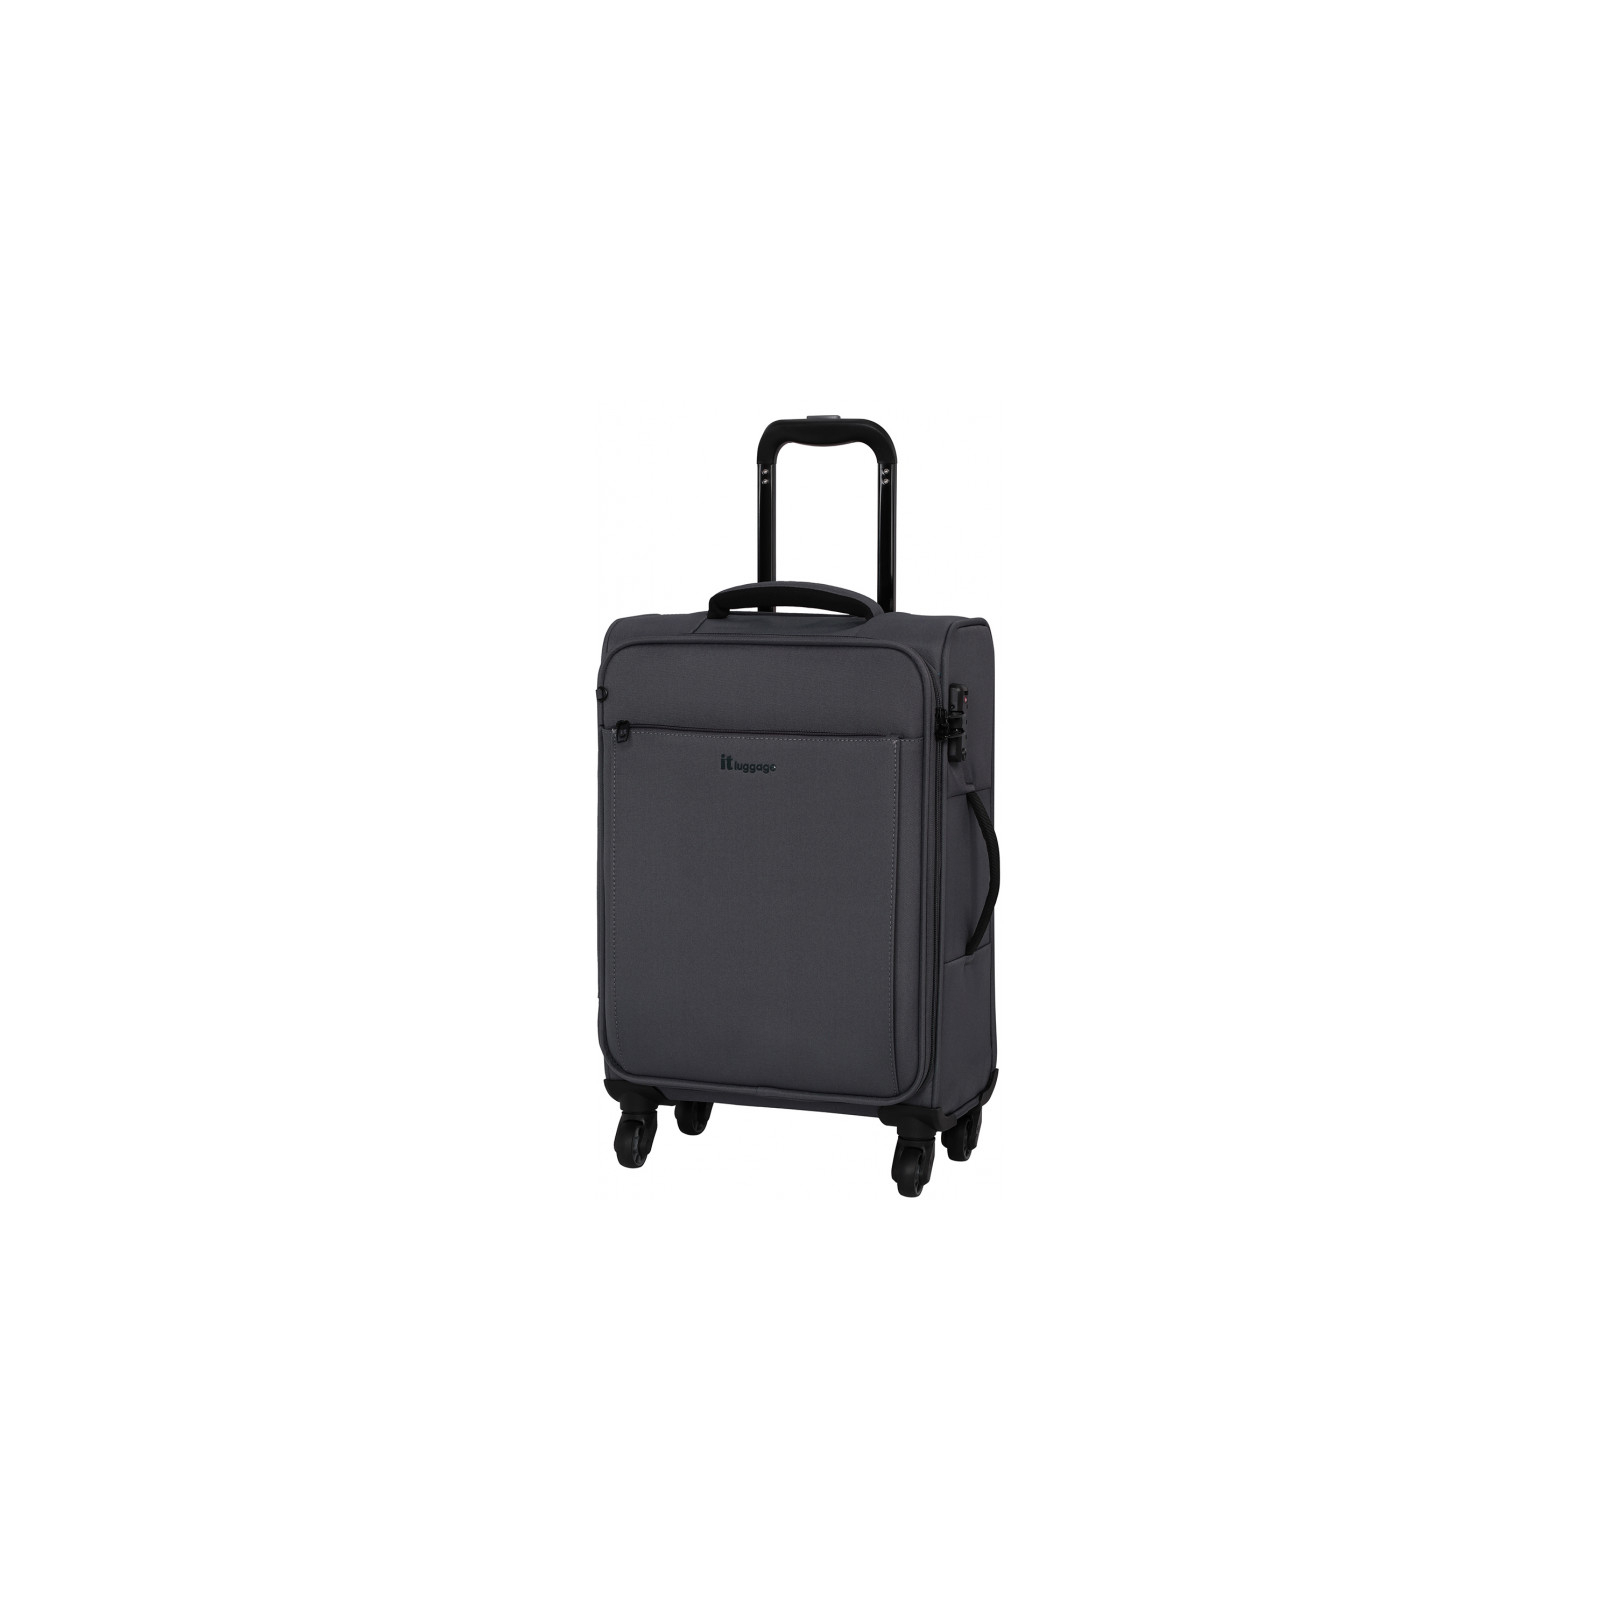 Валіза IT Luggage Accentuate Steel Gray S (IT12-2277-04-S-S885)